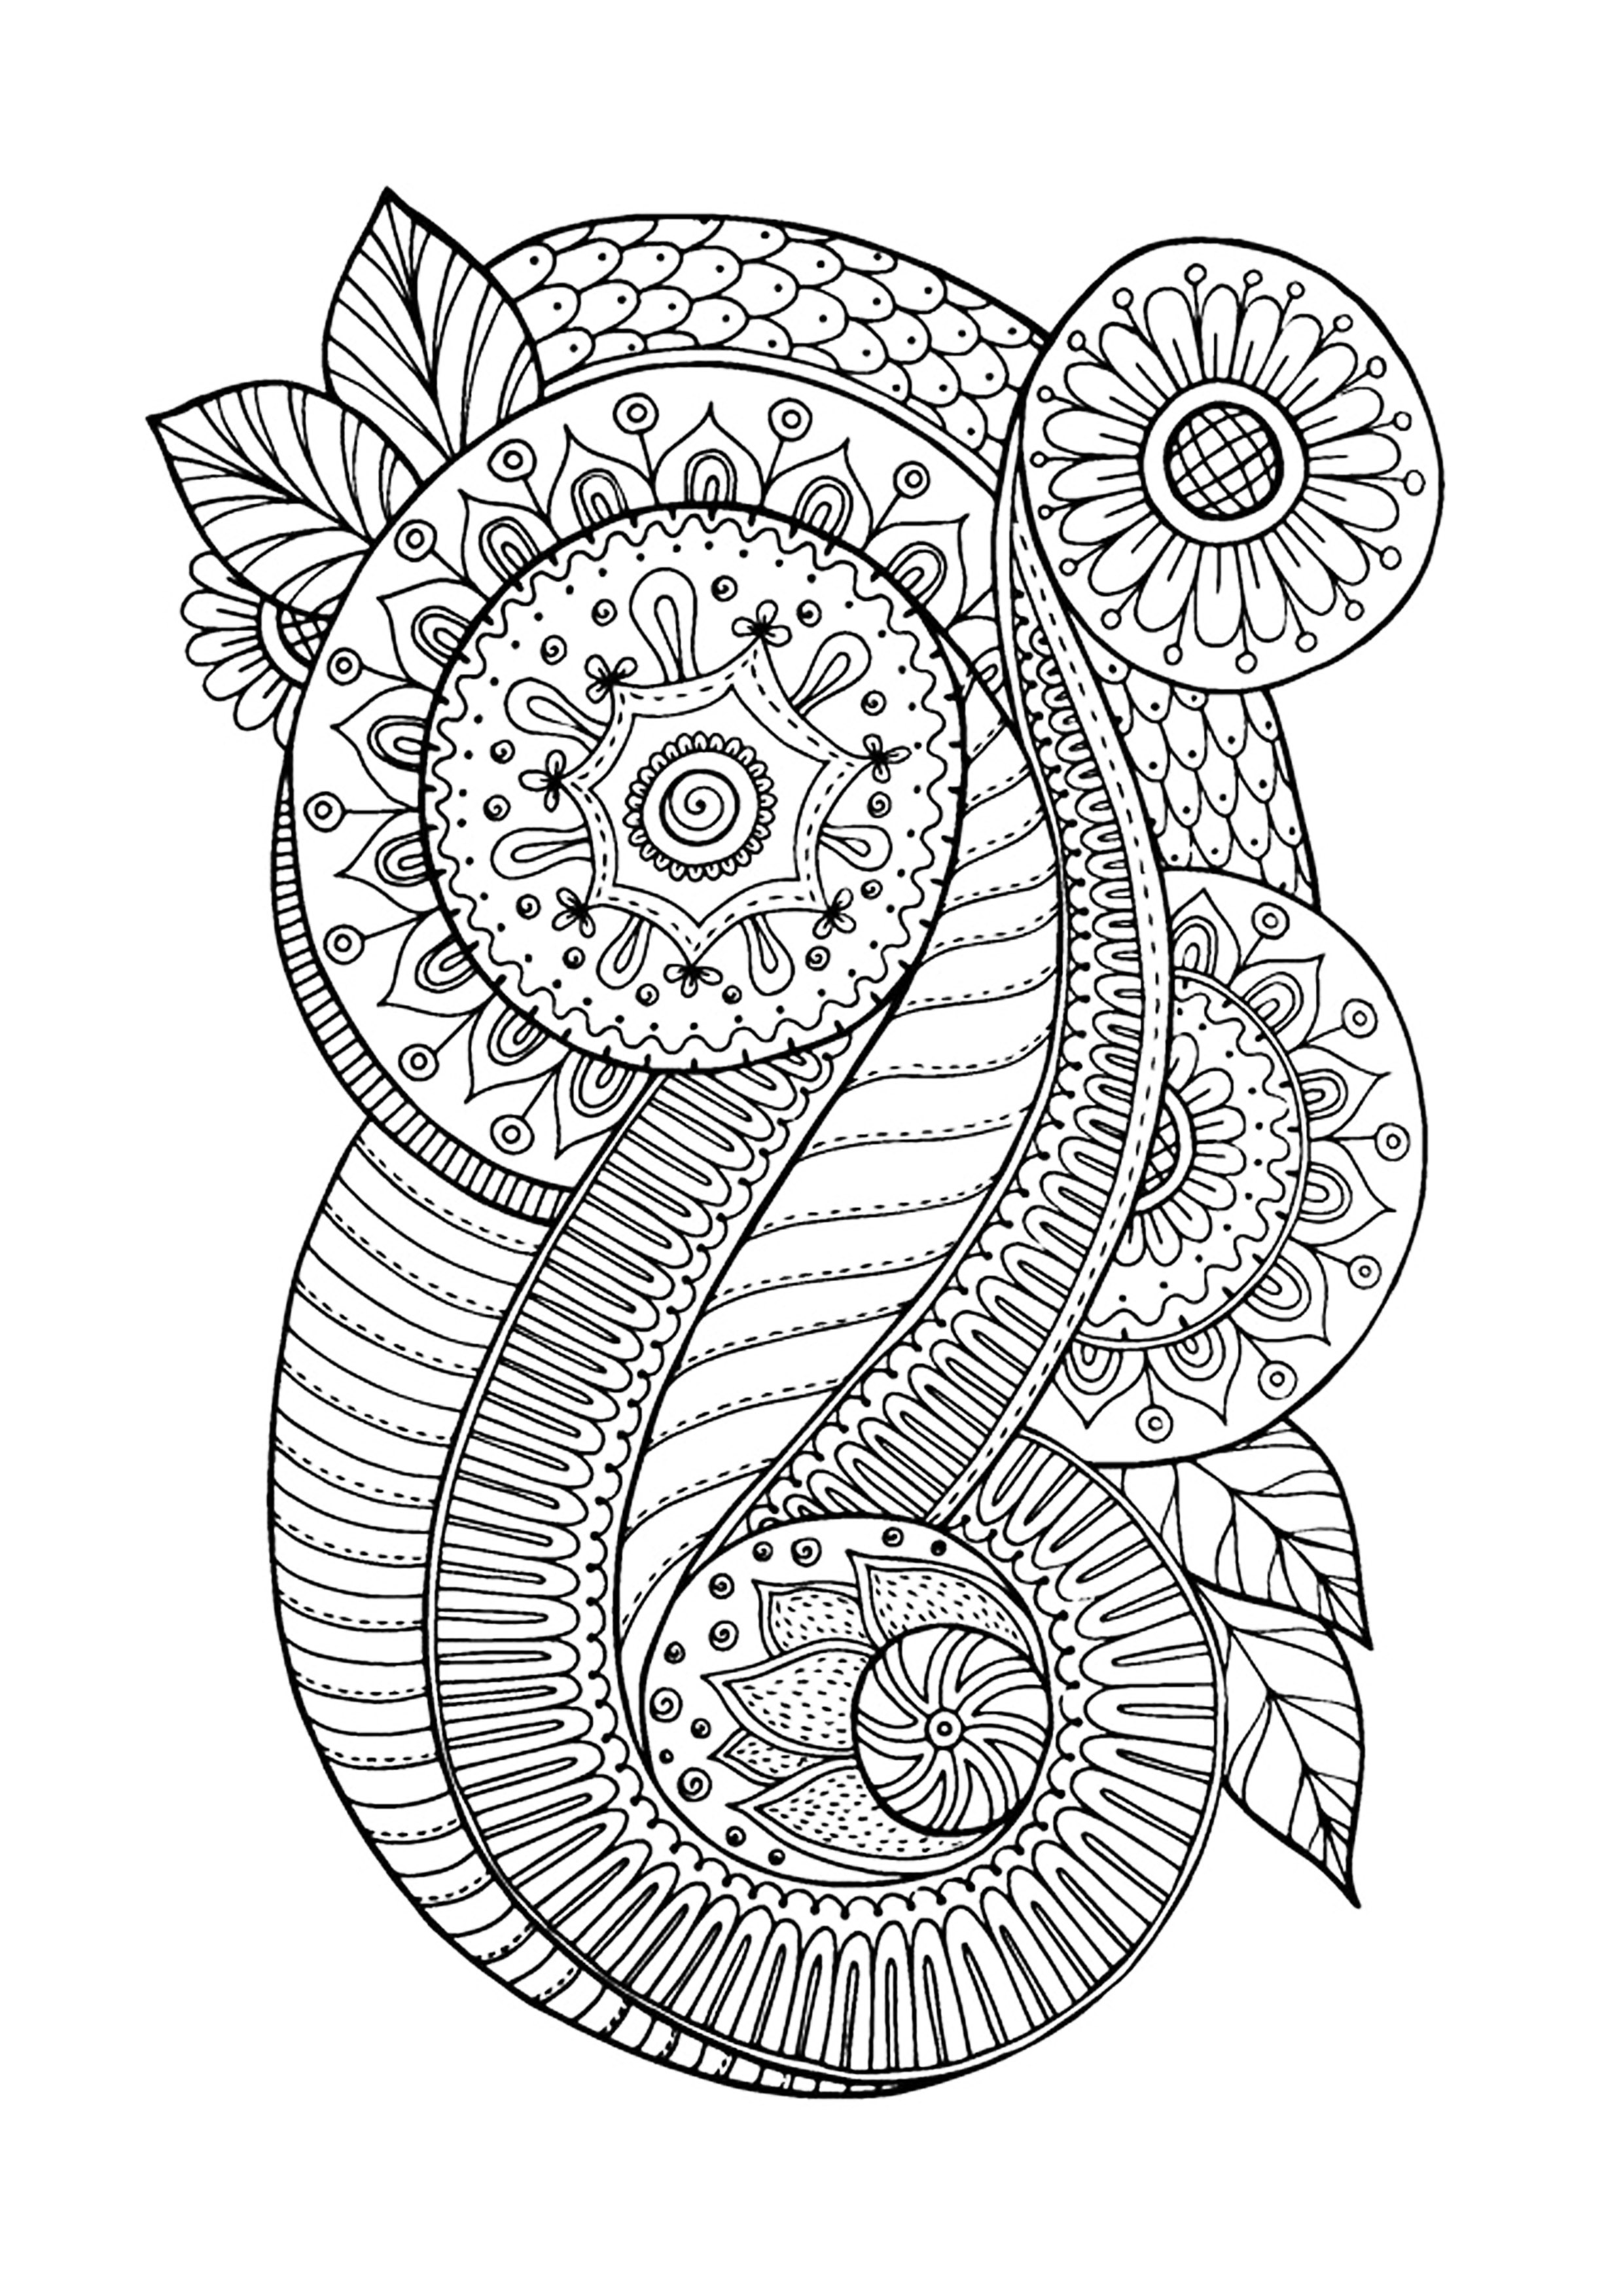 Zen & Anti-stress Coloring page : Abstract pattern inspired by flowers : n°4, Artist : Juliasnegireva   Source : 123rf